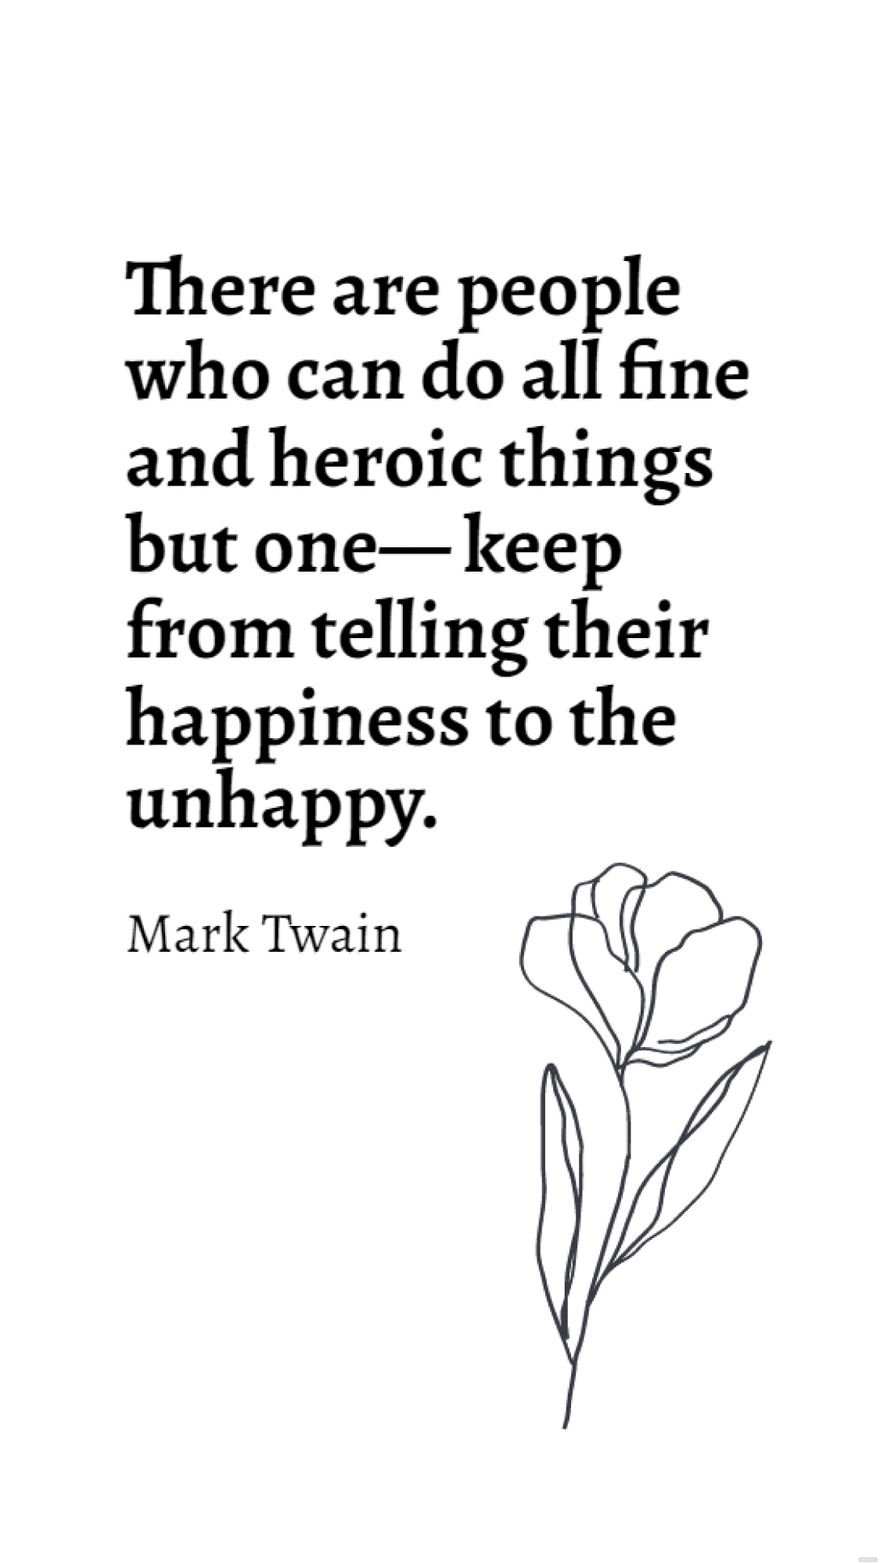 Mark Twain - There are people who can do all fine and heroic things but one - keep from telling their happiness to the unhappy. in JPG